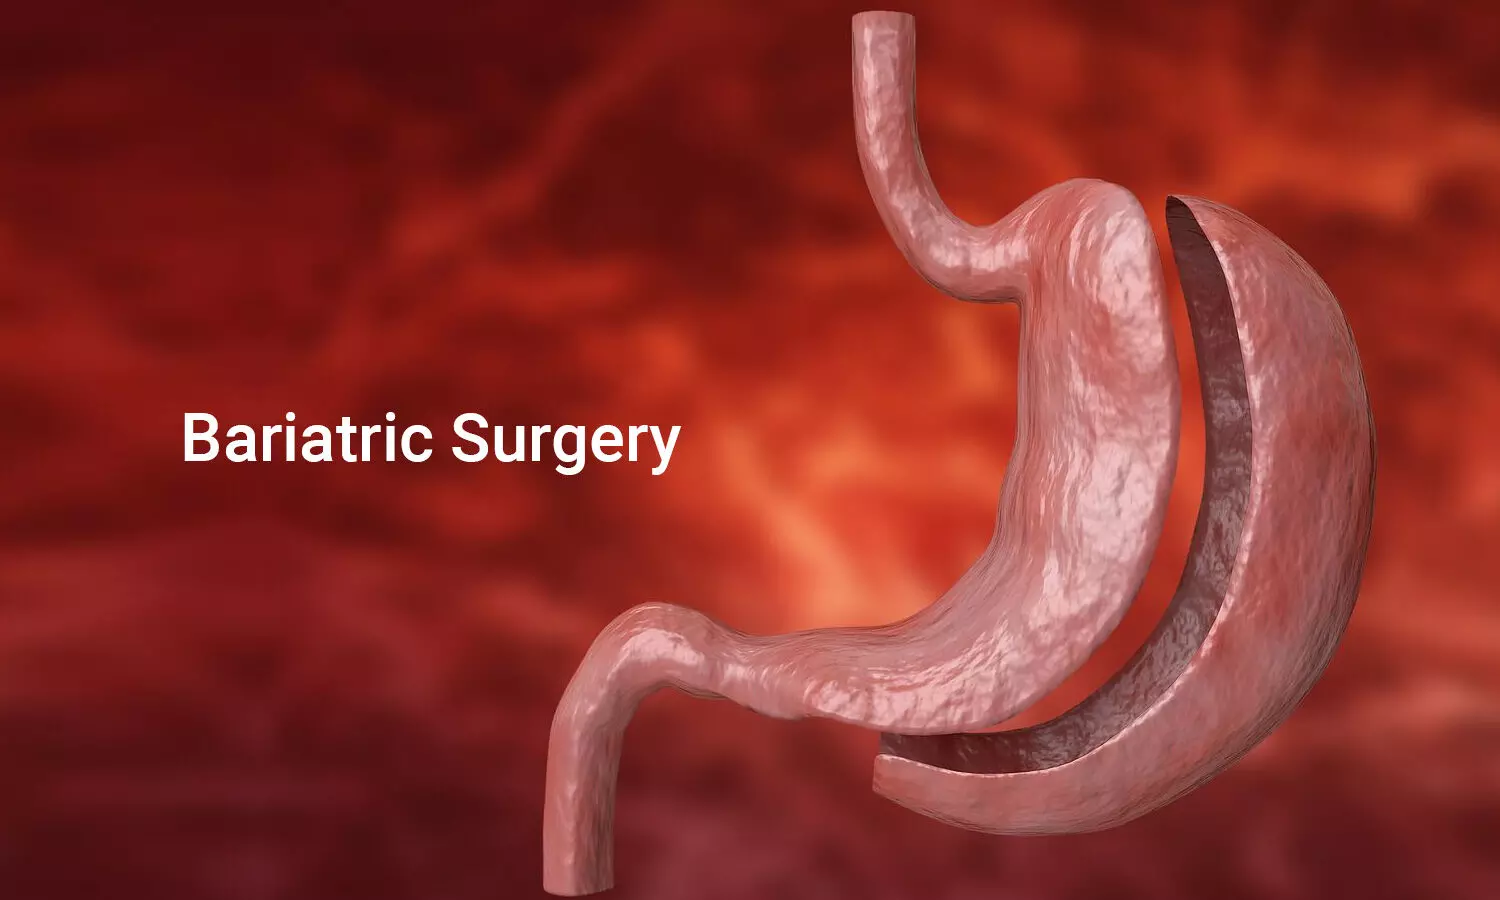 Bariatric surgery may increase fracture risk